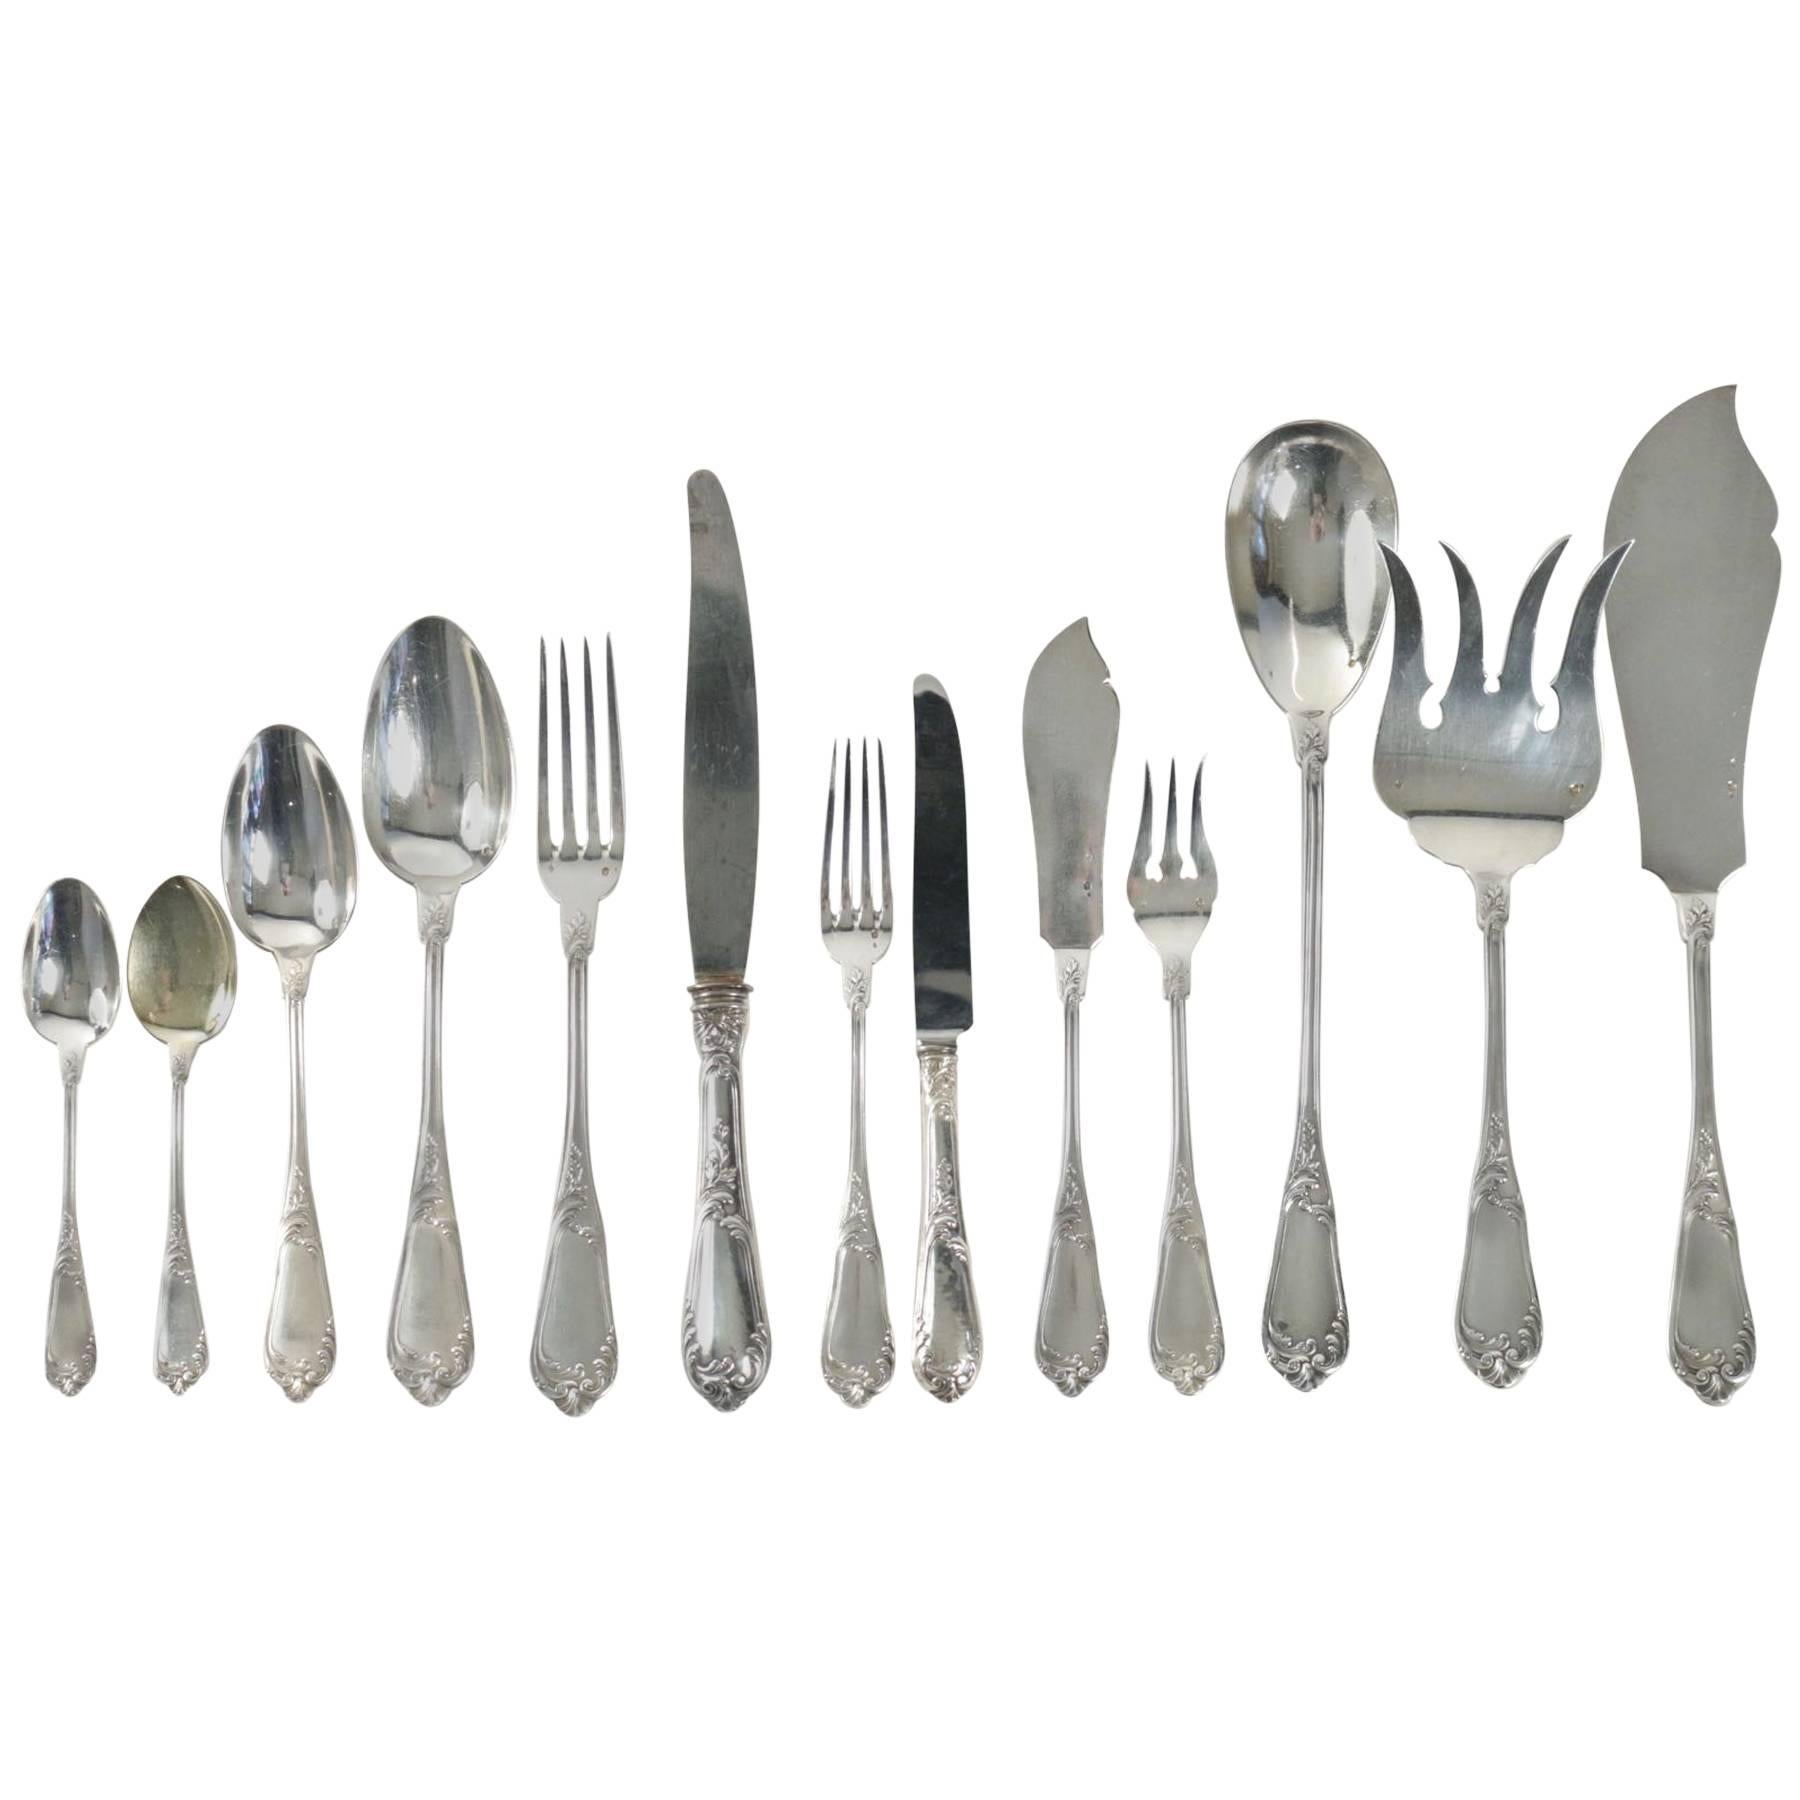 Soufflot "Caron" French Sterling Silver Dinner Flatware Set of 124 Pieces